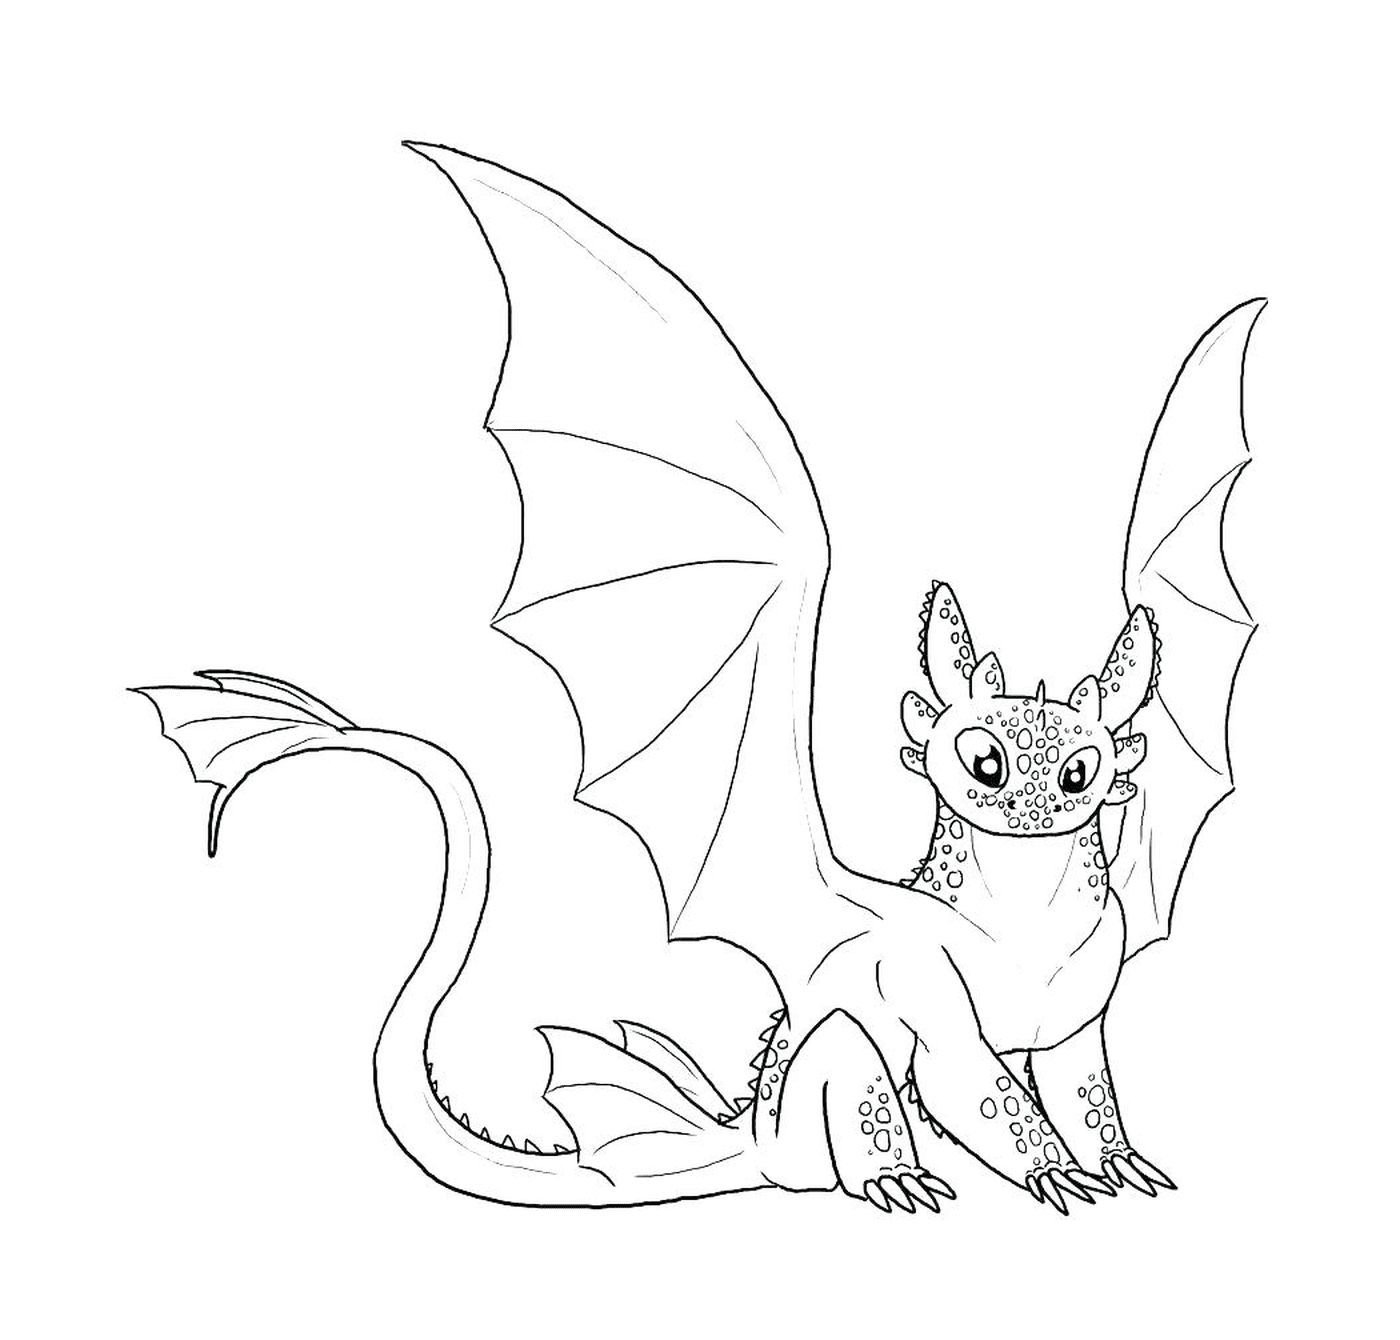  Toothless, a cute dragon 